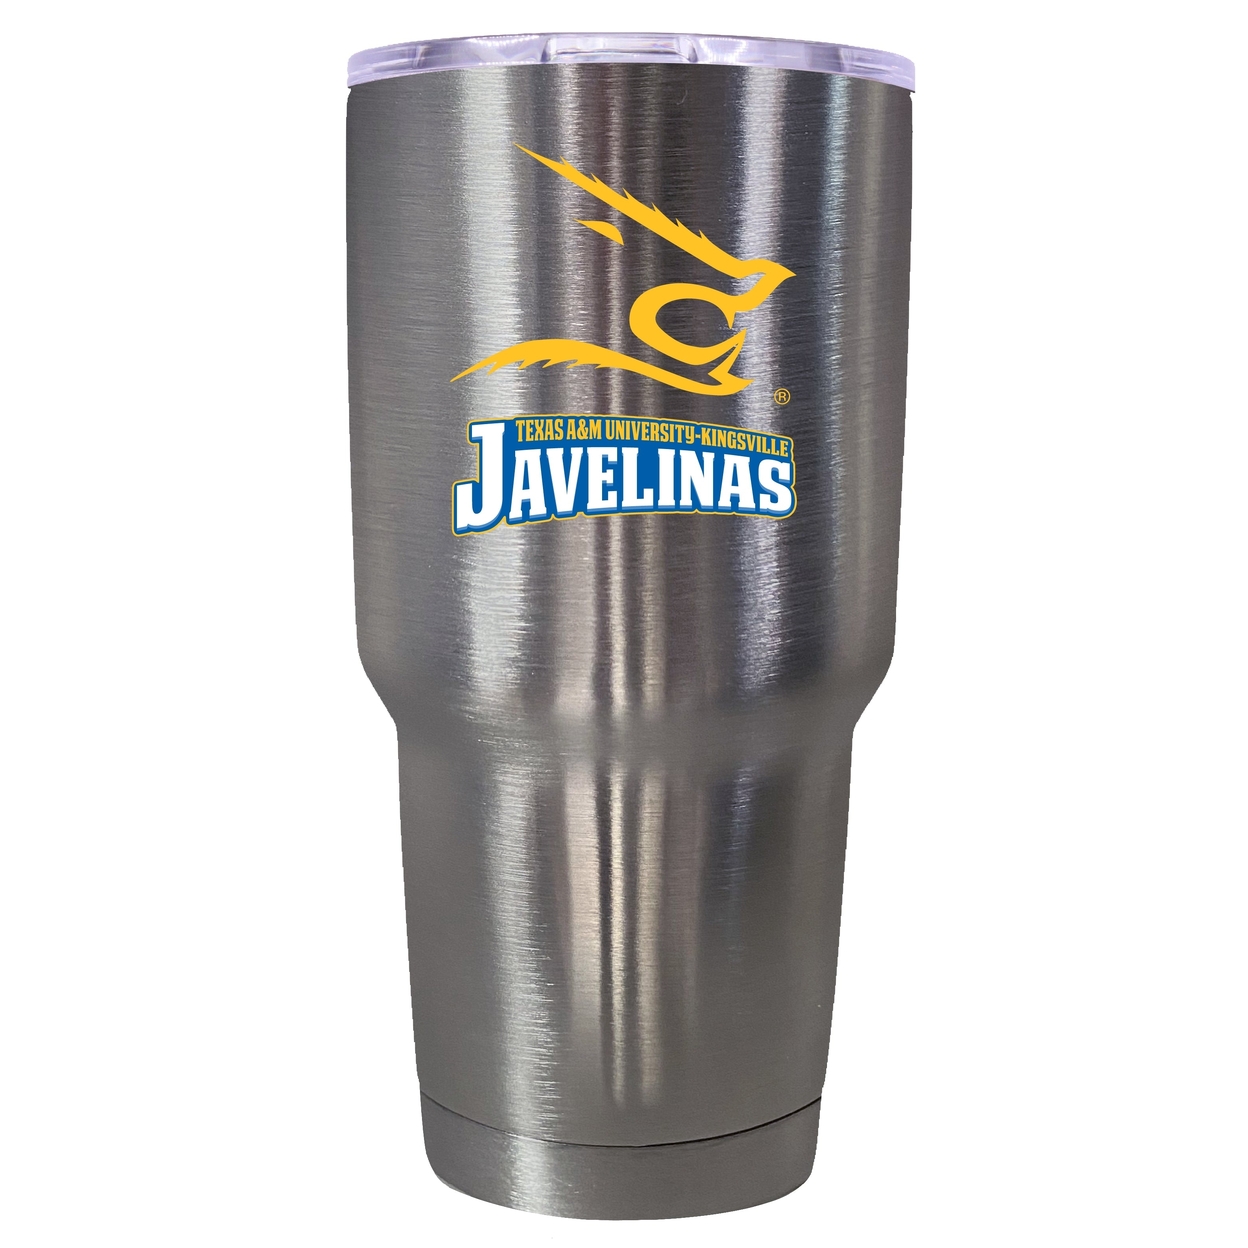 Texas A&M Kingsville Javelinas 24 Oz Insulated Stainless Steel Tumbler